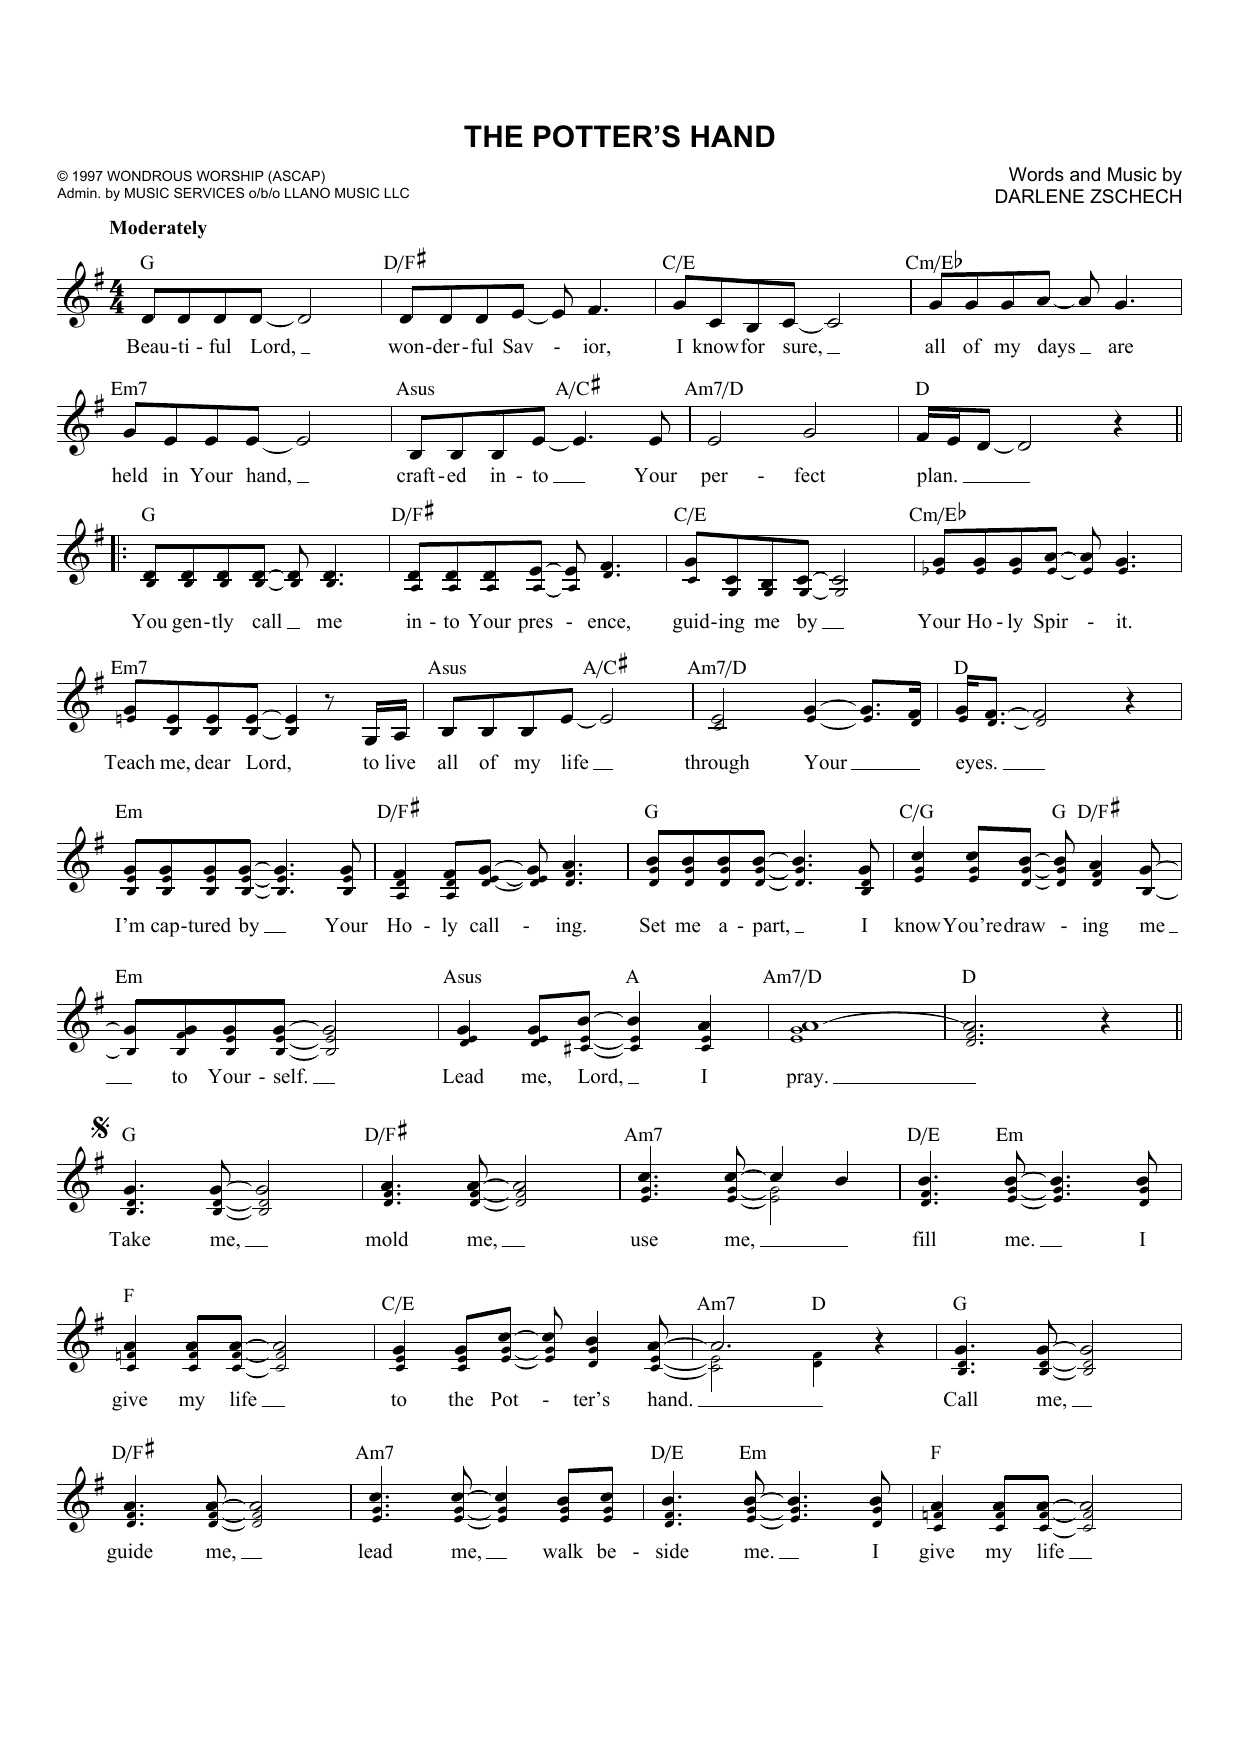 Darlene Zschech The Potter's Hand sheet music notes printable PDF score